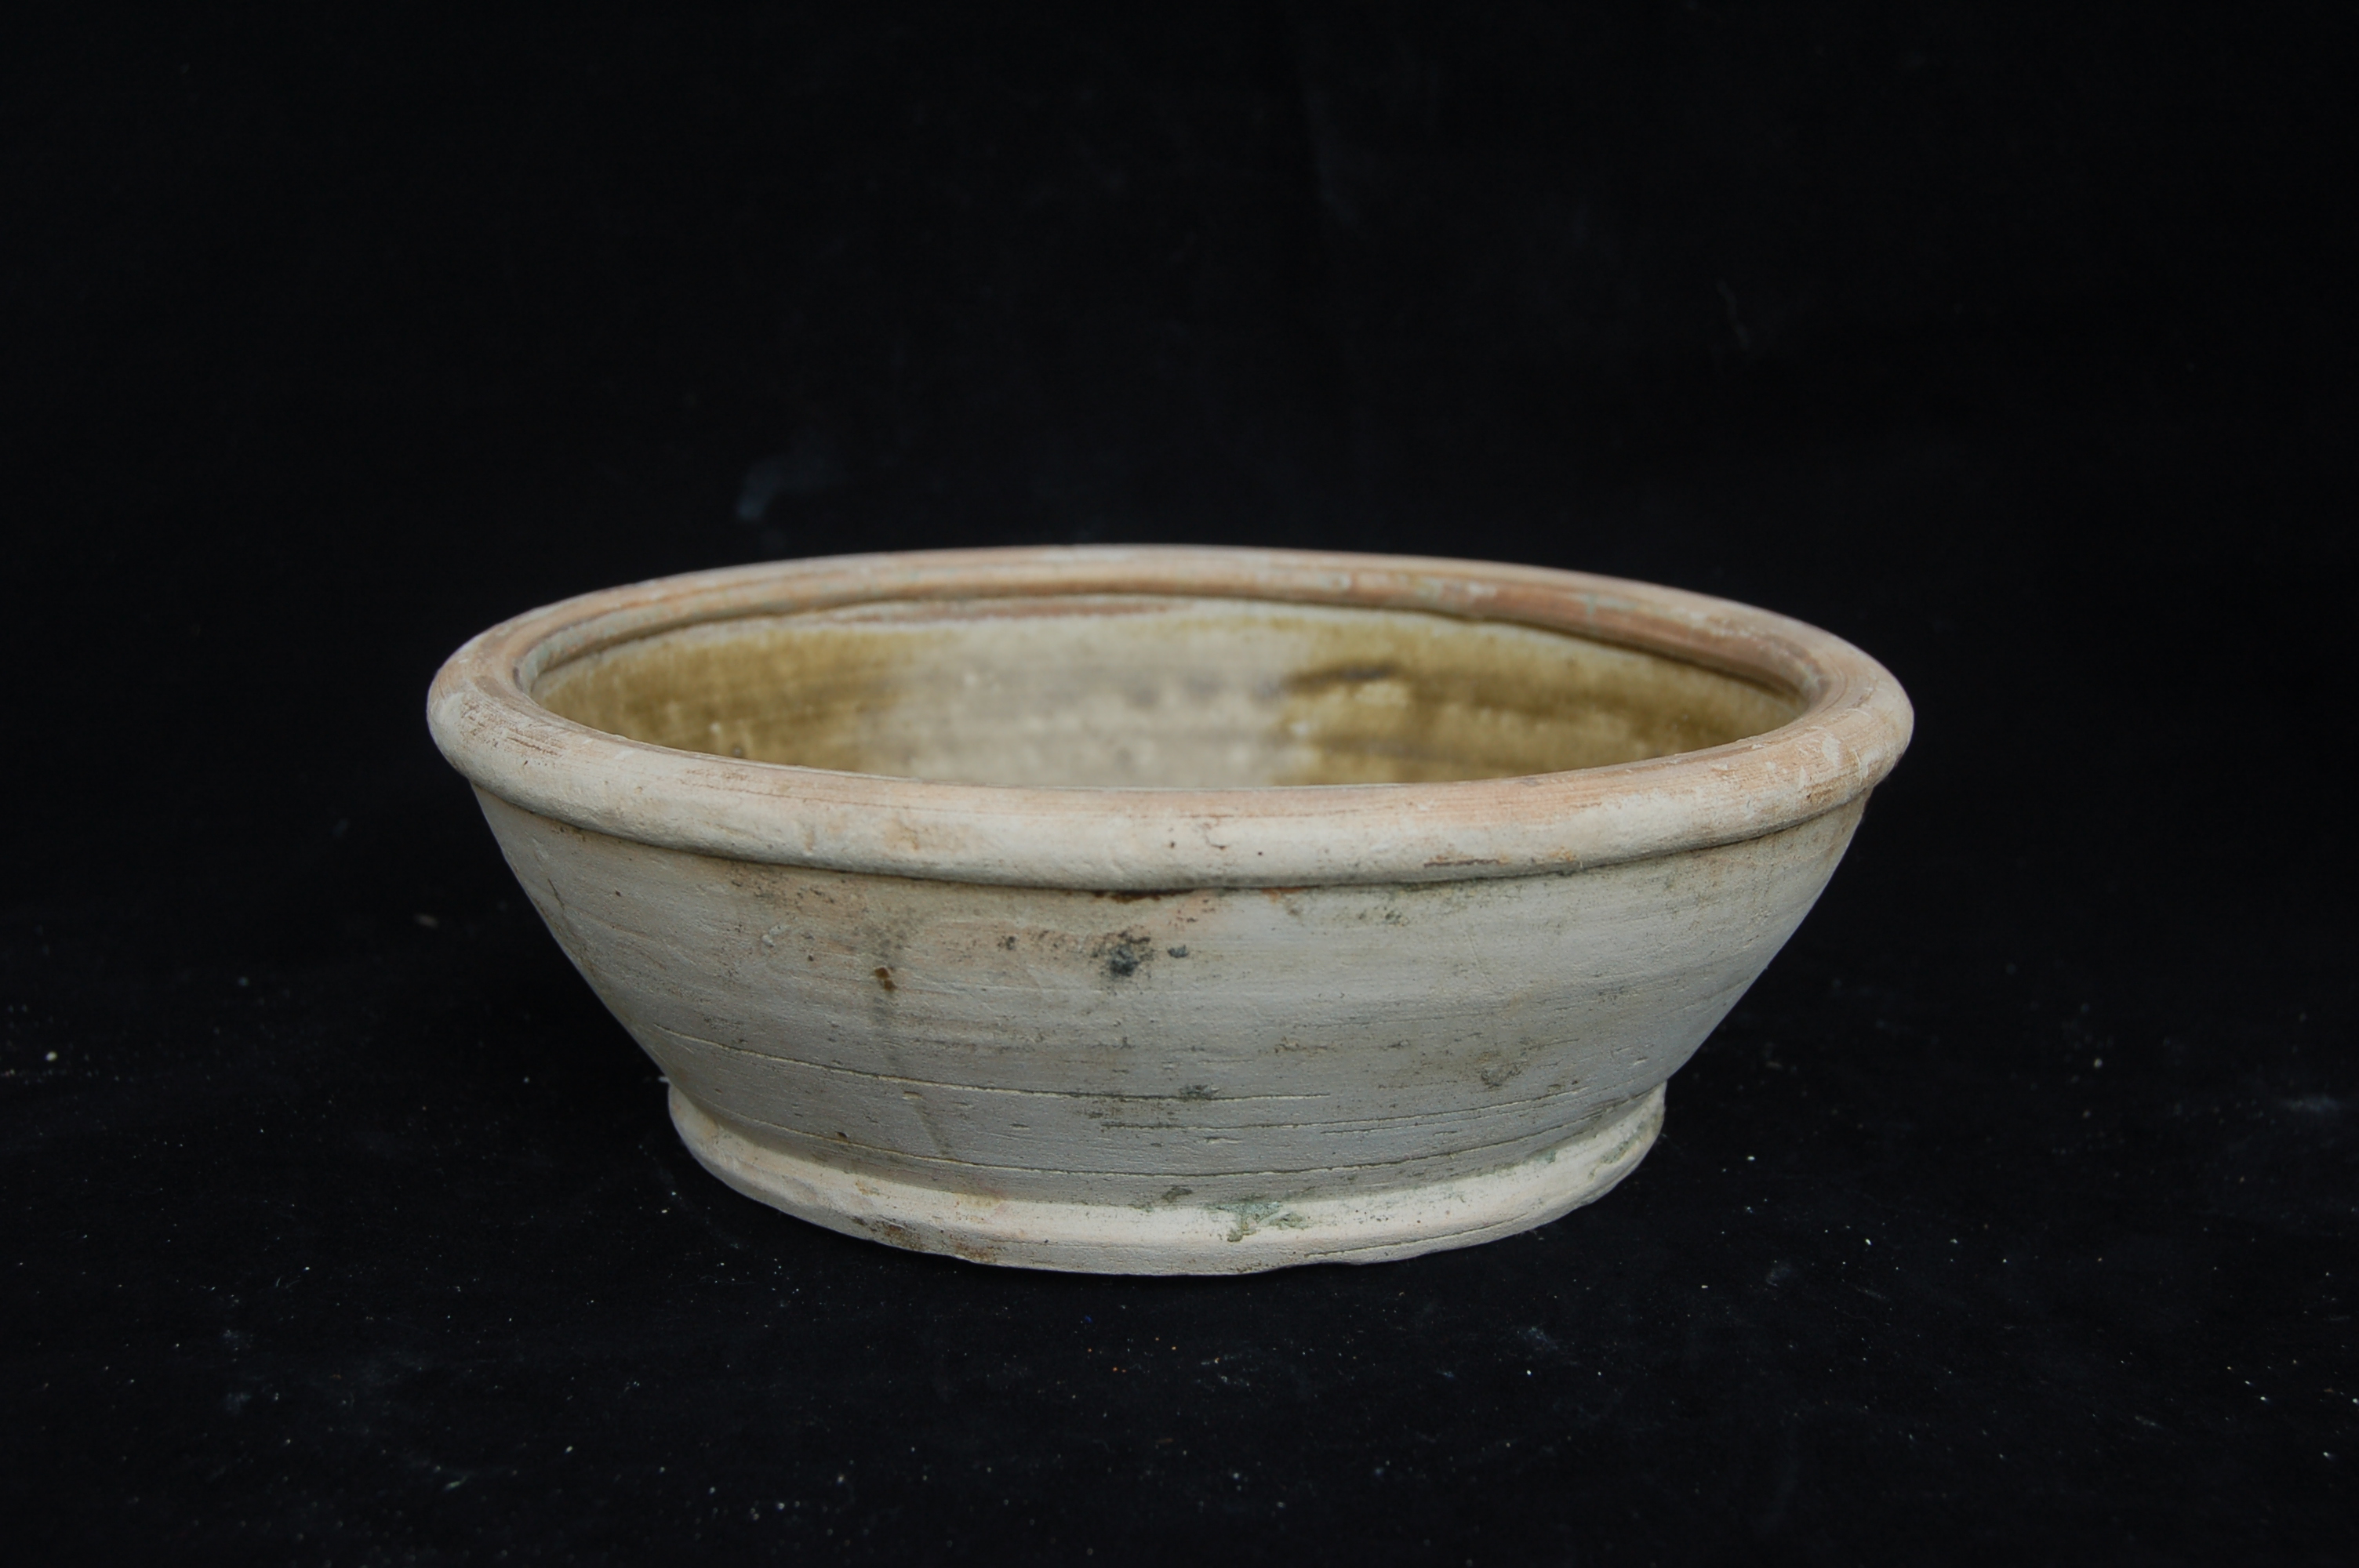 Small basin with olive-green glaze, decorated with a pair of flying birds. It has straight walls with a folded rim, and a flat base. Diameter 20 cm, height 6.5 cm.